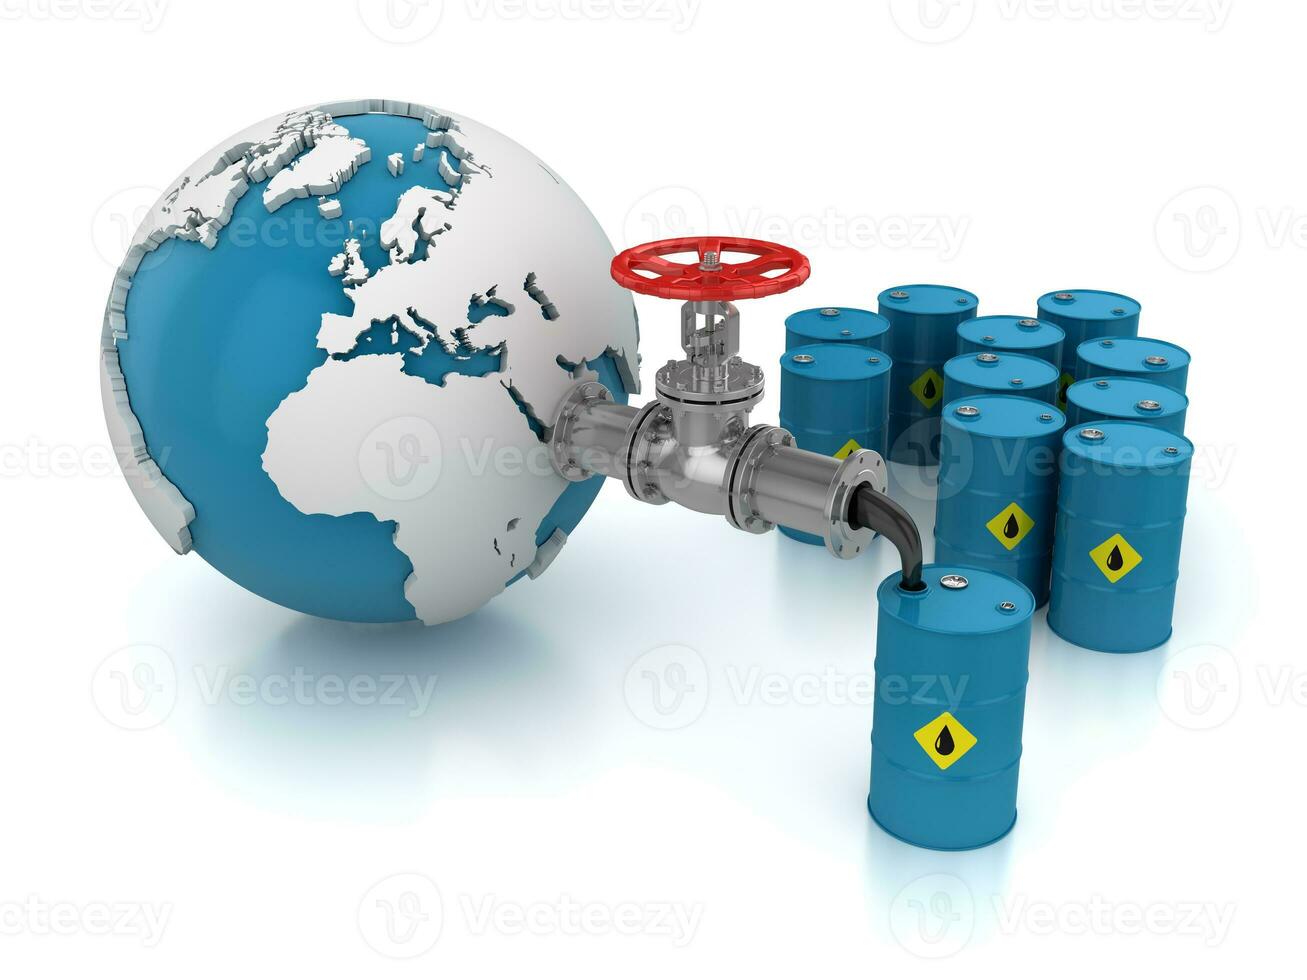 Oil Valve with World Map photo